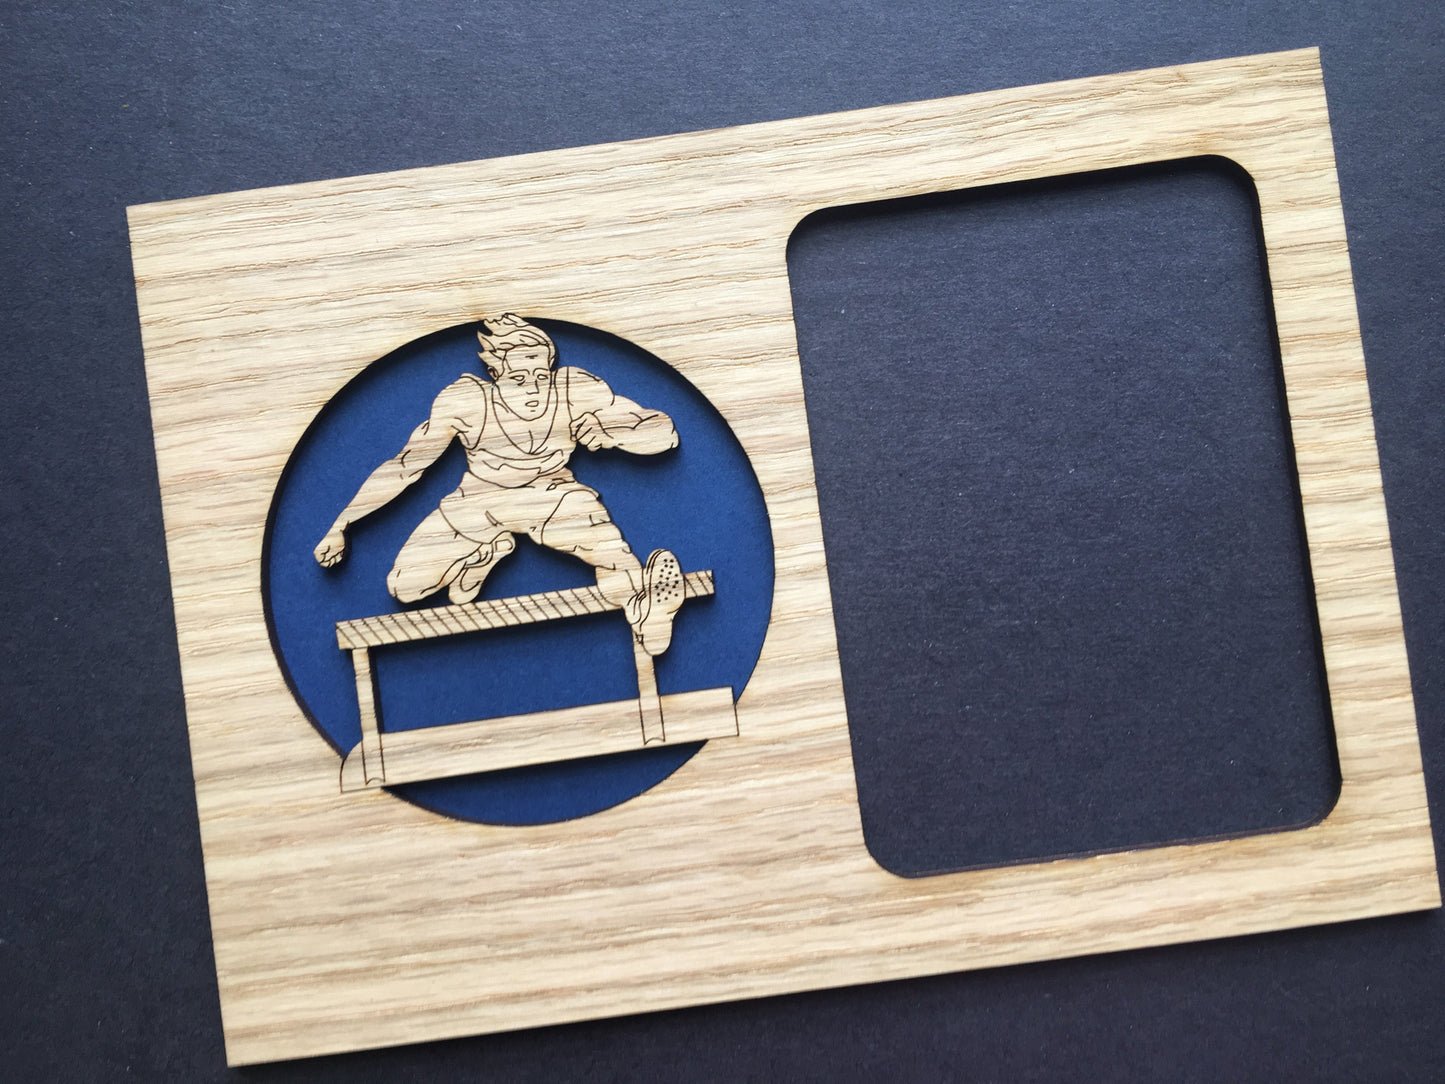 Track & Field Picture Frame